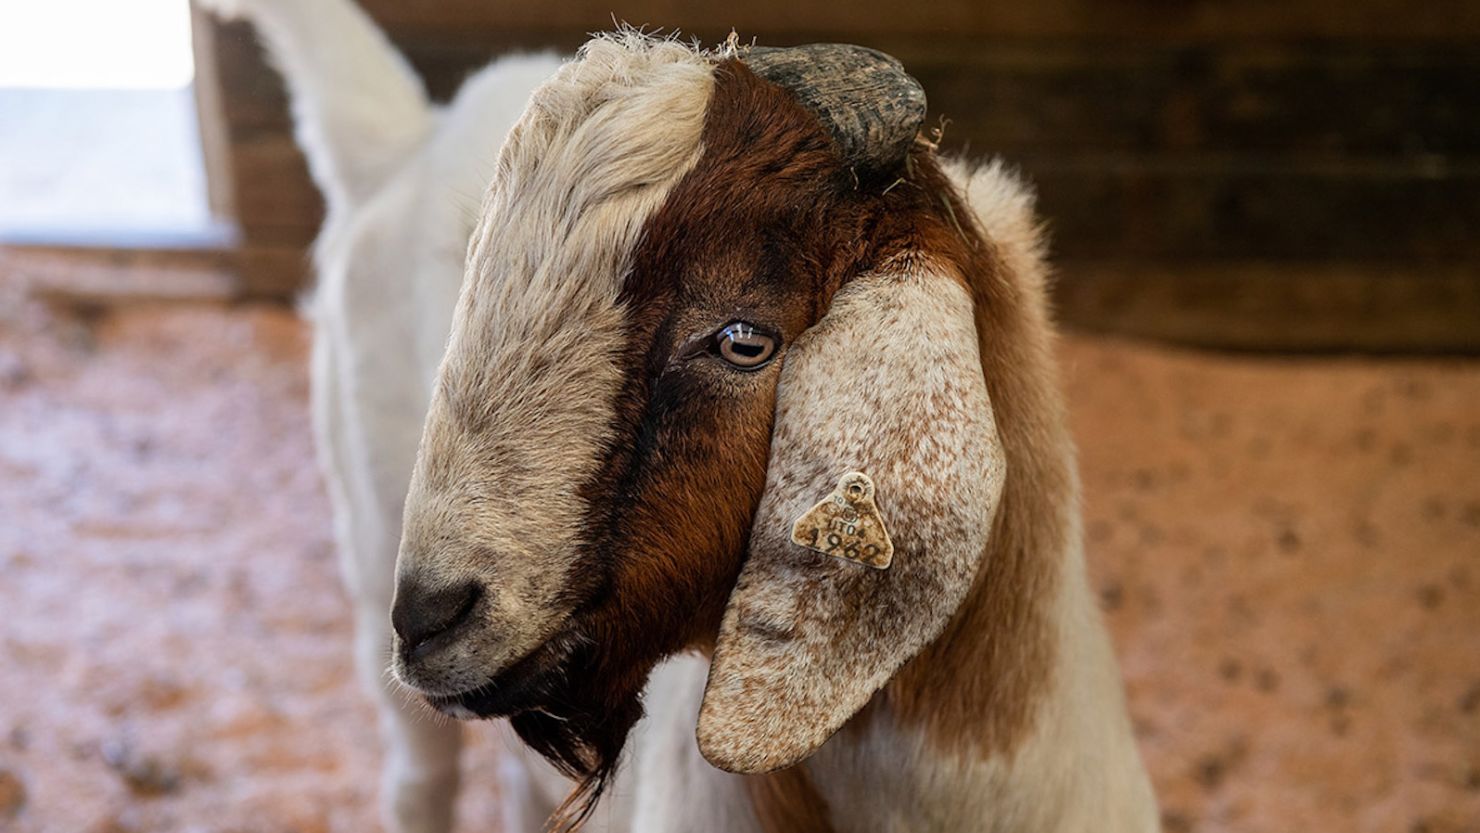 One of the "surrogate sire" goats on the Washington State University Pullman campus, photographed in August 2020.